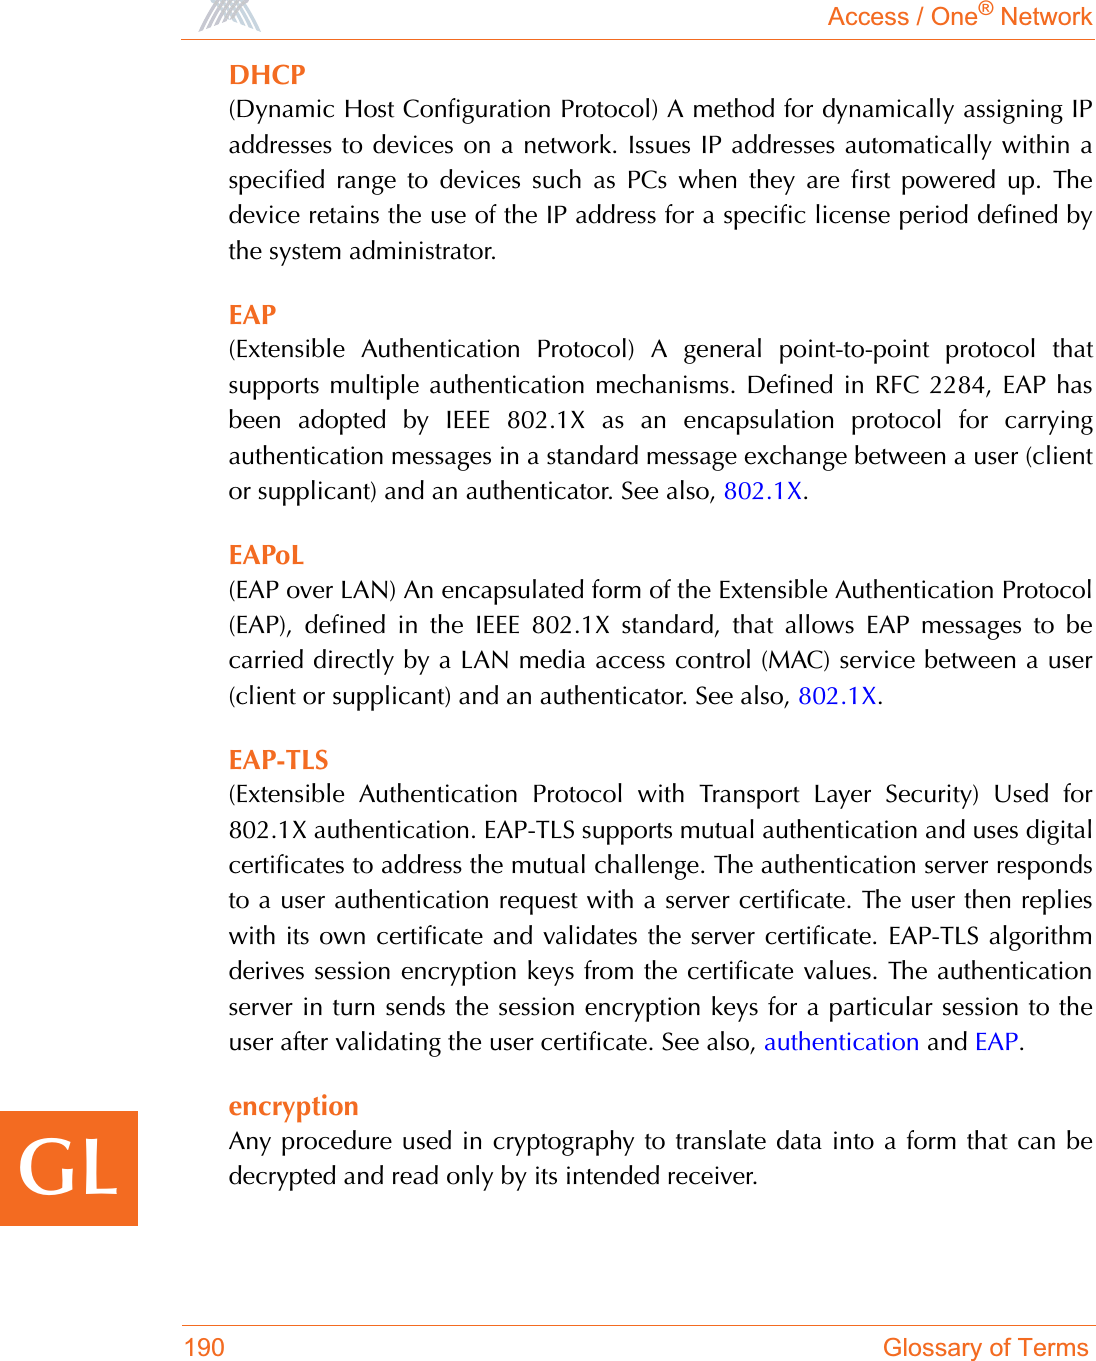 Access / One® Network190 Glossary of TermsGLDHCP(Dynamic Host Configuration Protocol) A method for dynamically assigning IPaddresses to devices on a network. Issues IP addresses automatically within aspecified range to devices such as PCs when they are first powered up. Thedevice retains the use of the IP address for a specific license period defined bythe system administrator.EAP(Extensible Authentication Protocol) A general point-to-point protocol thatsupports multiple authentication mechanisms. Defined in RFC 2284, EAP hasbeen adopted by IEEE 802.1X as an encapsulation protocol for carryingauthentication messages in a standard message exchange between a user (clientor supplicant) and an authenticator. See also, 802.1X.EAPoL(EAP over LAN) An encapsulated form of the Extensible Authentication Protocol(EAP), defined in the IEEE 802.1X standard, that allows EAP messages to becarried directly by a LAN media access control (MAC) service between a user(client or supplicant) and an authenticator. See also, 802.1X.EAP-TLS(Extensible Authentication Protocol with Transport Layer Security) Used for802.1X authentication. EAP-TLS supports mutual authentication and uses digitalcertificates to address the mutual challenge. The authentication server respondsto a user authentication request with a server certificate. The user then replieswith its own certificate and validates the server certificate. EAP-TLS algorithmderives session encryption keys from the certificate values. The authenticationserver in turn sends the session encryption keys for a particular session to theuser after validating the user certificate. See also, authentication and EAP.encryptionAny procedure used in cryptography to translate data into a form that can bedecrypted and read only by its intended receiver. 